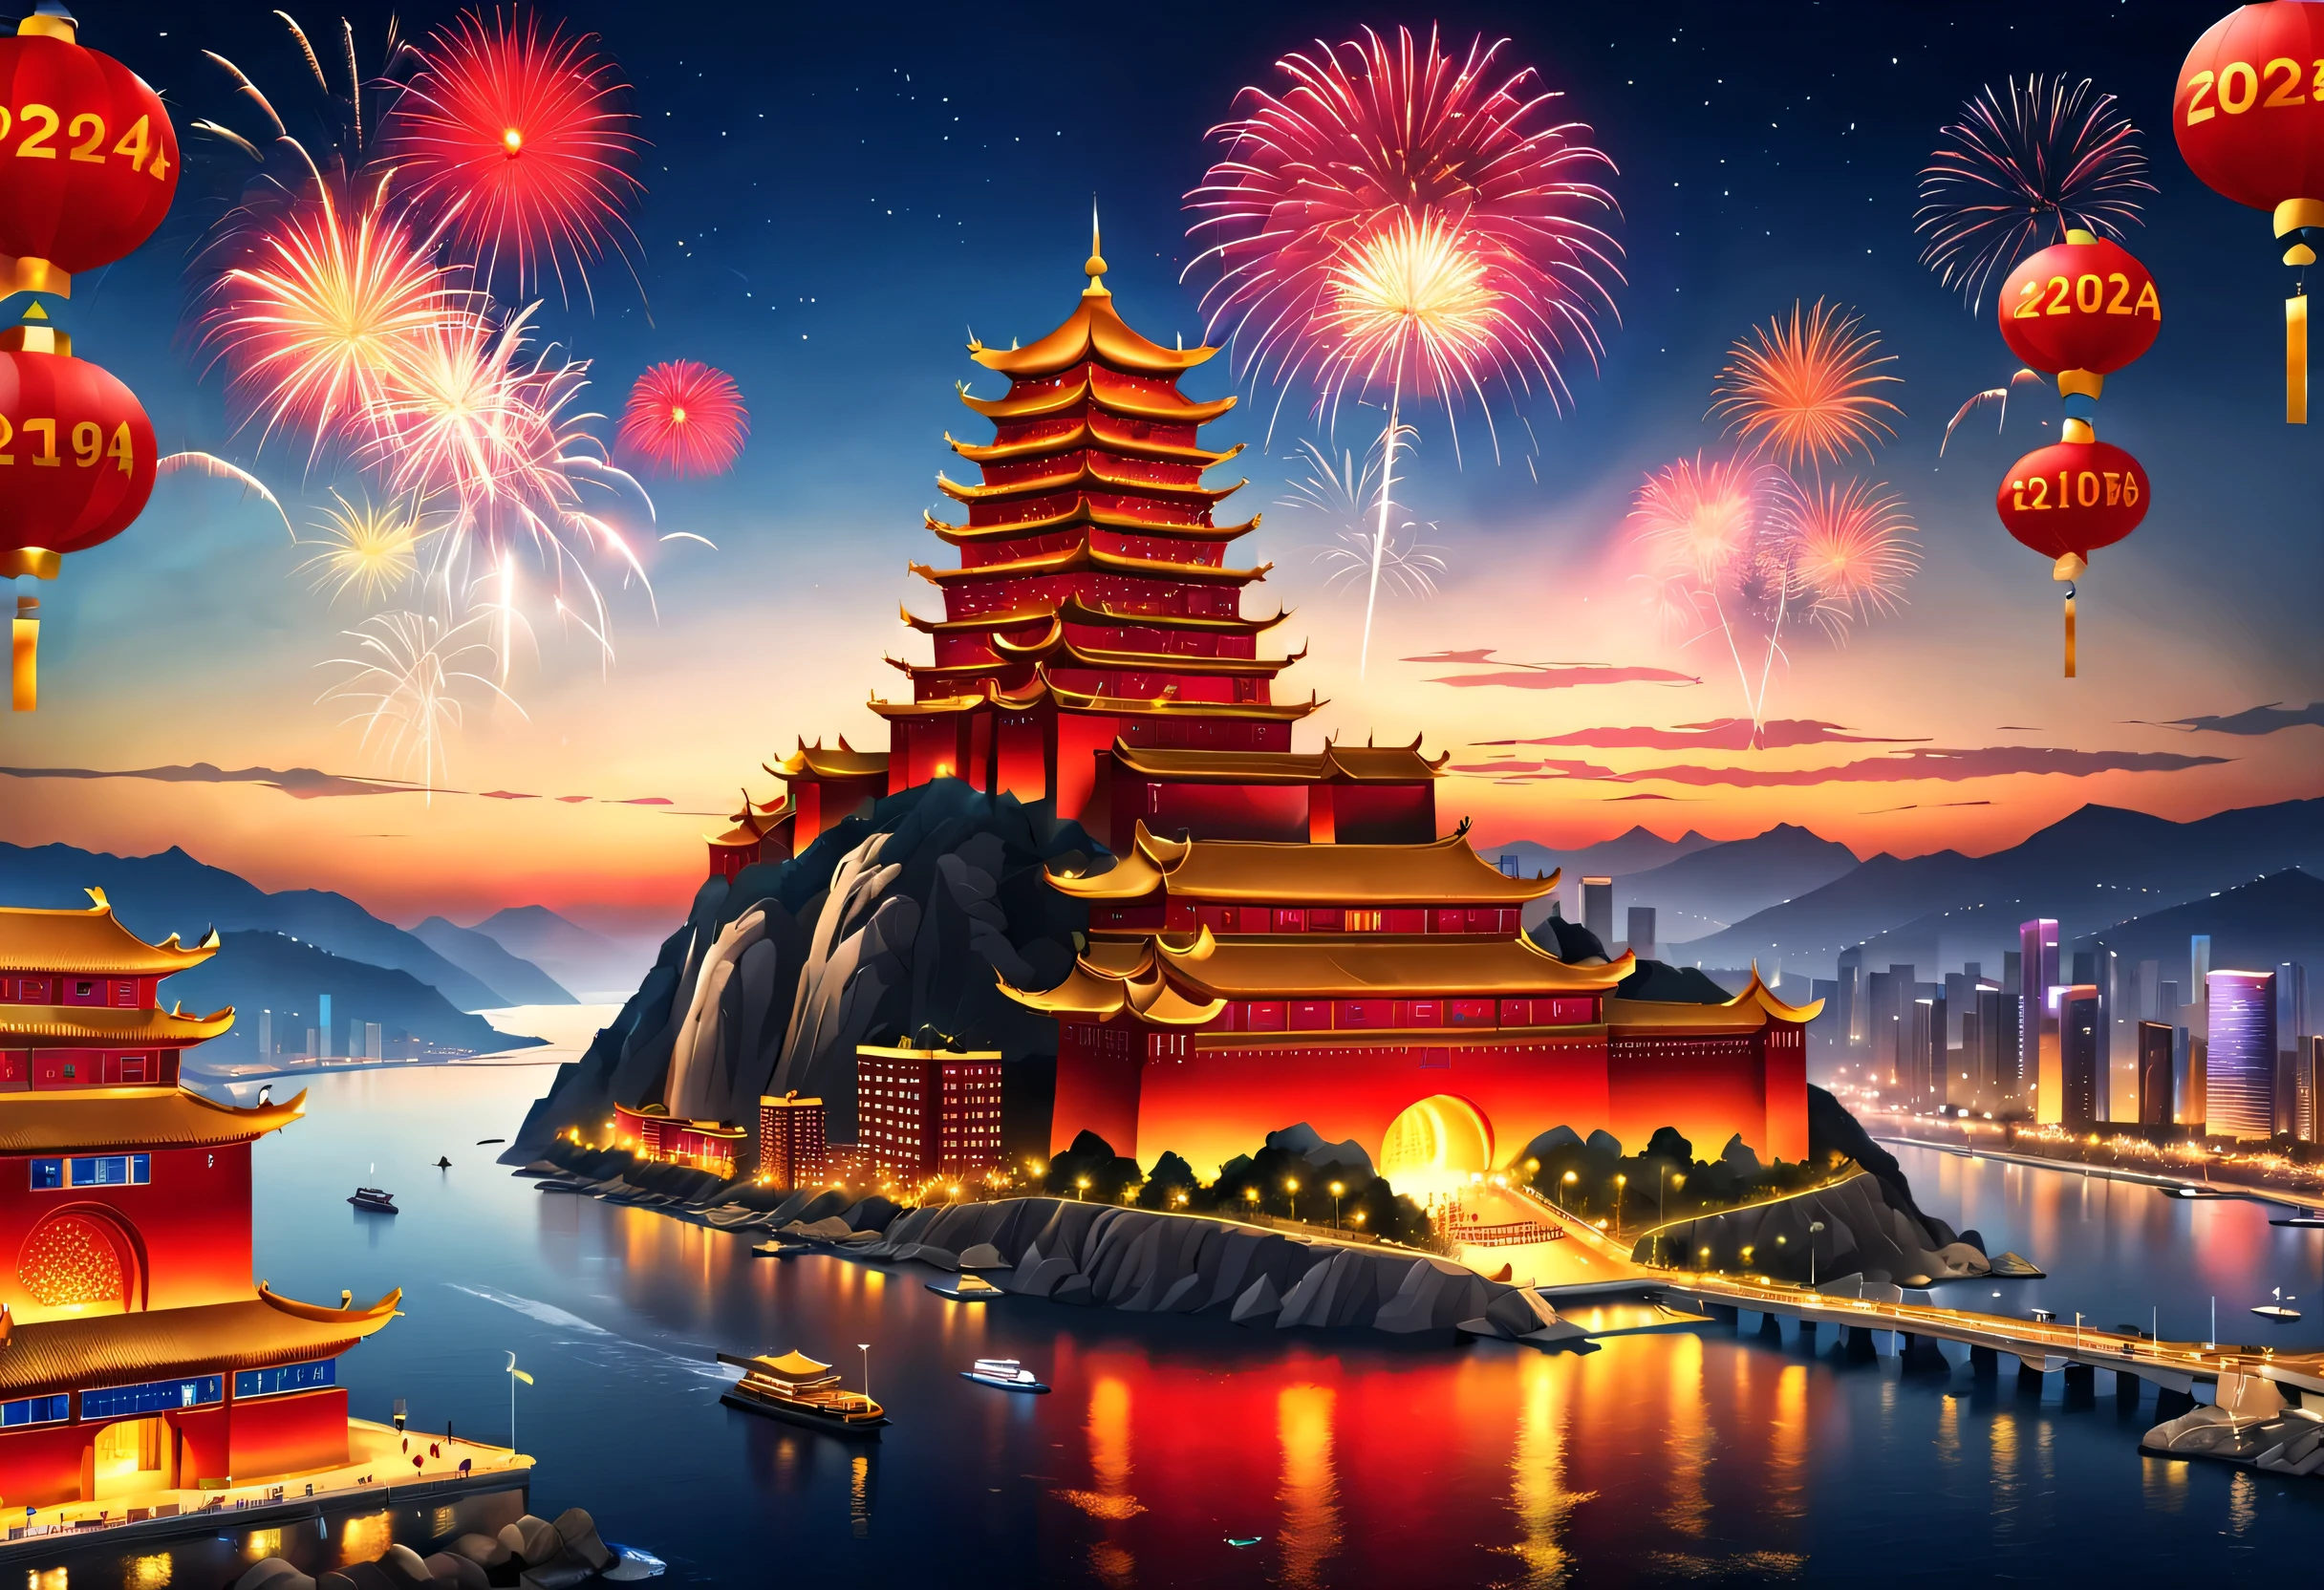 (2024 New Year’s Eve celebration scene design), (Red and gold poster design), (Qingdao seaside giant building complex thousands of miles away, Chinese big breasts: 1.2), Projection screen, (a happy new year: 1.3), Crowd watching countdown on big screen, Fireworks blooming all over the sky, Many ribbons and colorful pieces fall in the sky, people&#39;s wishes, Background with: Heavy snow cover,